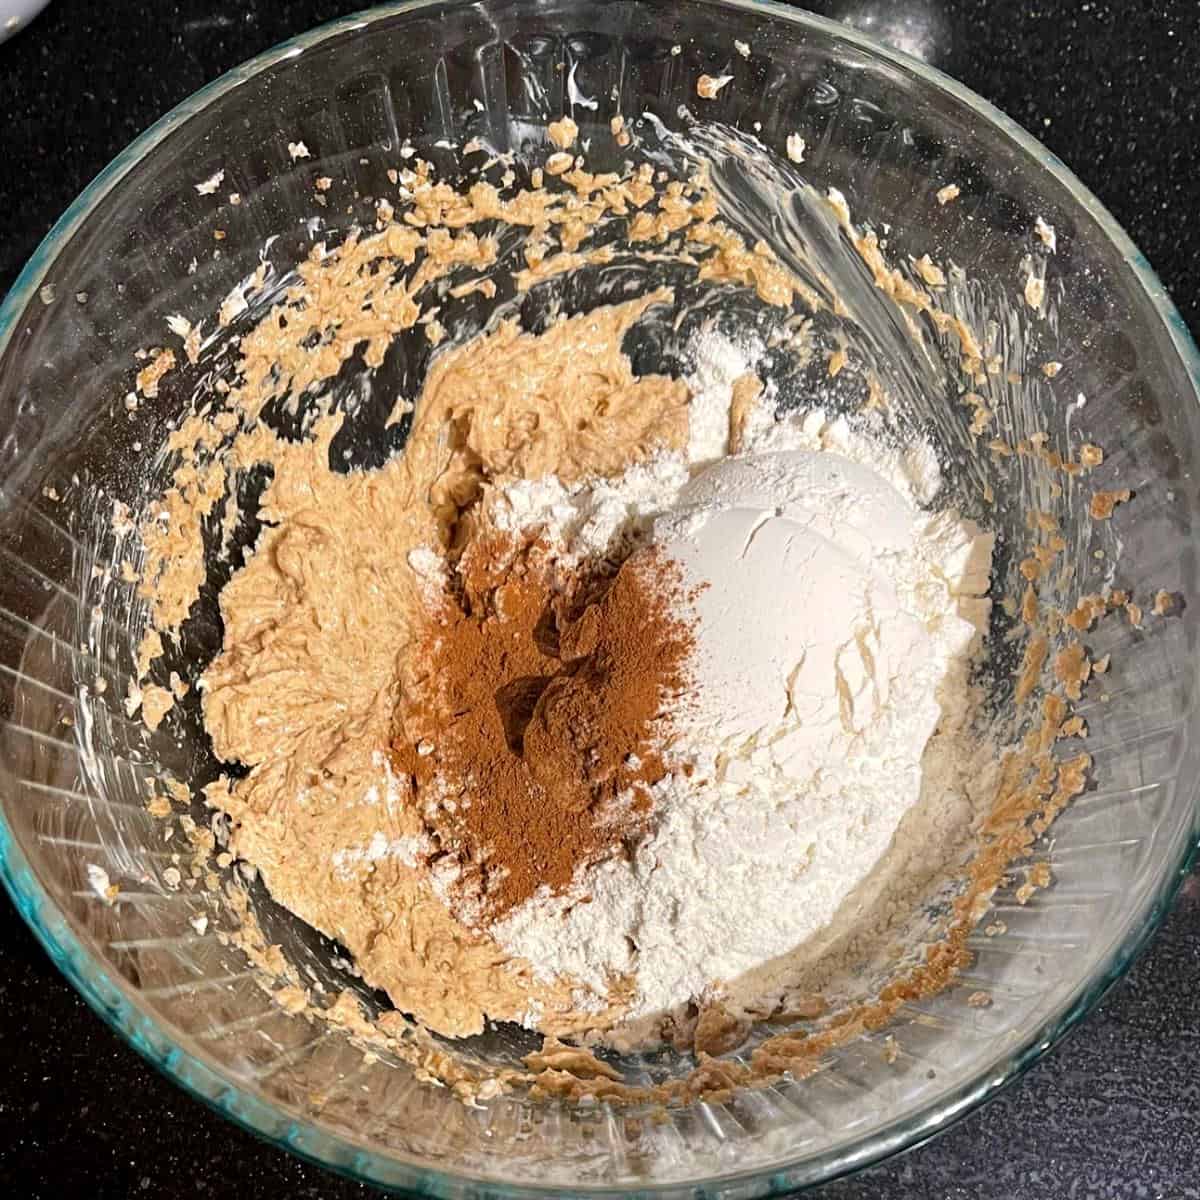 Ground cinnamon and flour added to cookie batter for oatmeal cookies.